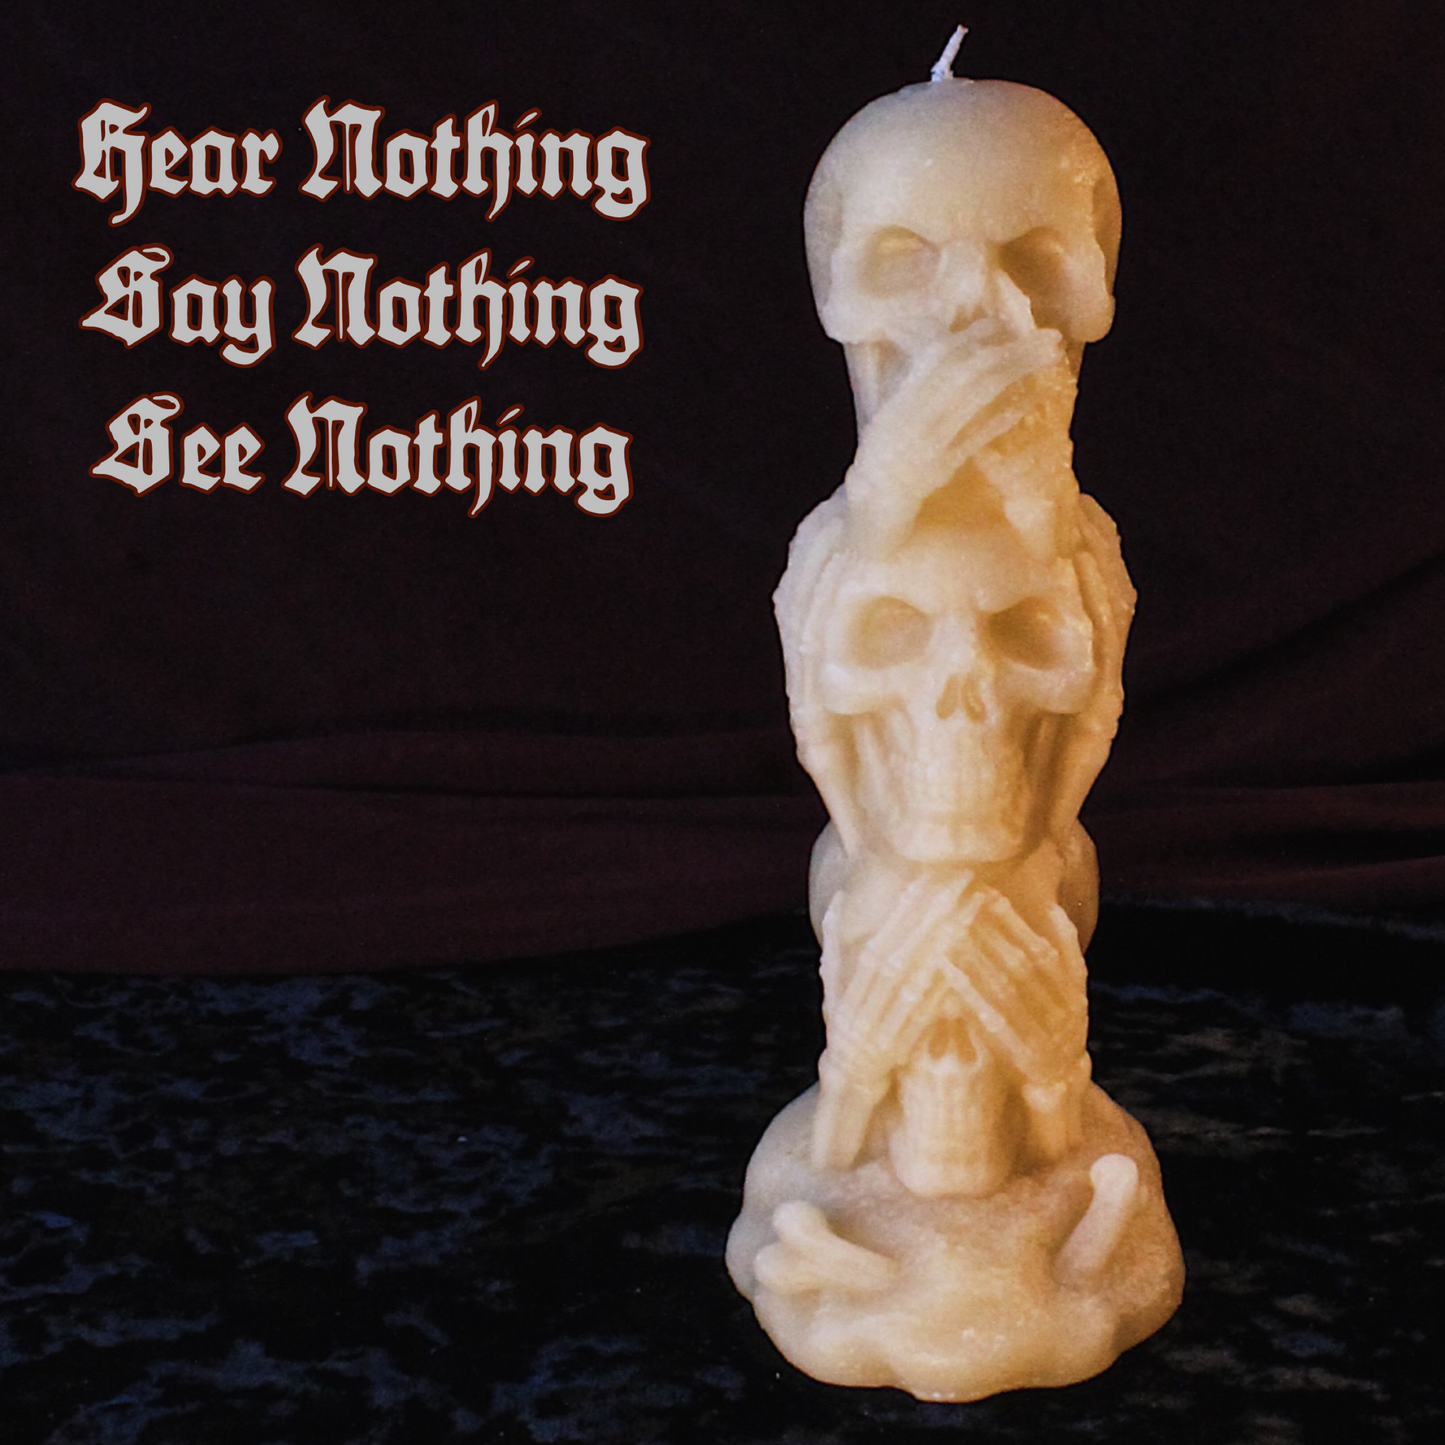 HEAR NOTHING, SAY NOTHINS, SEE NOTHING Bleeding Wax Candle - DRENCHEDskin®